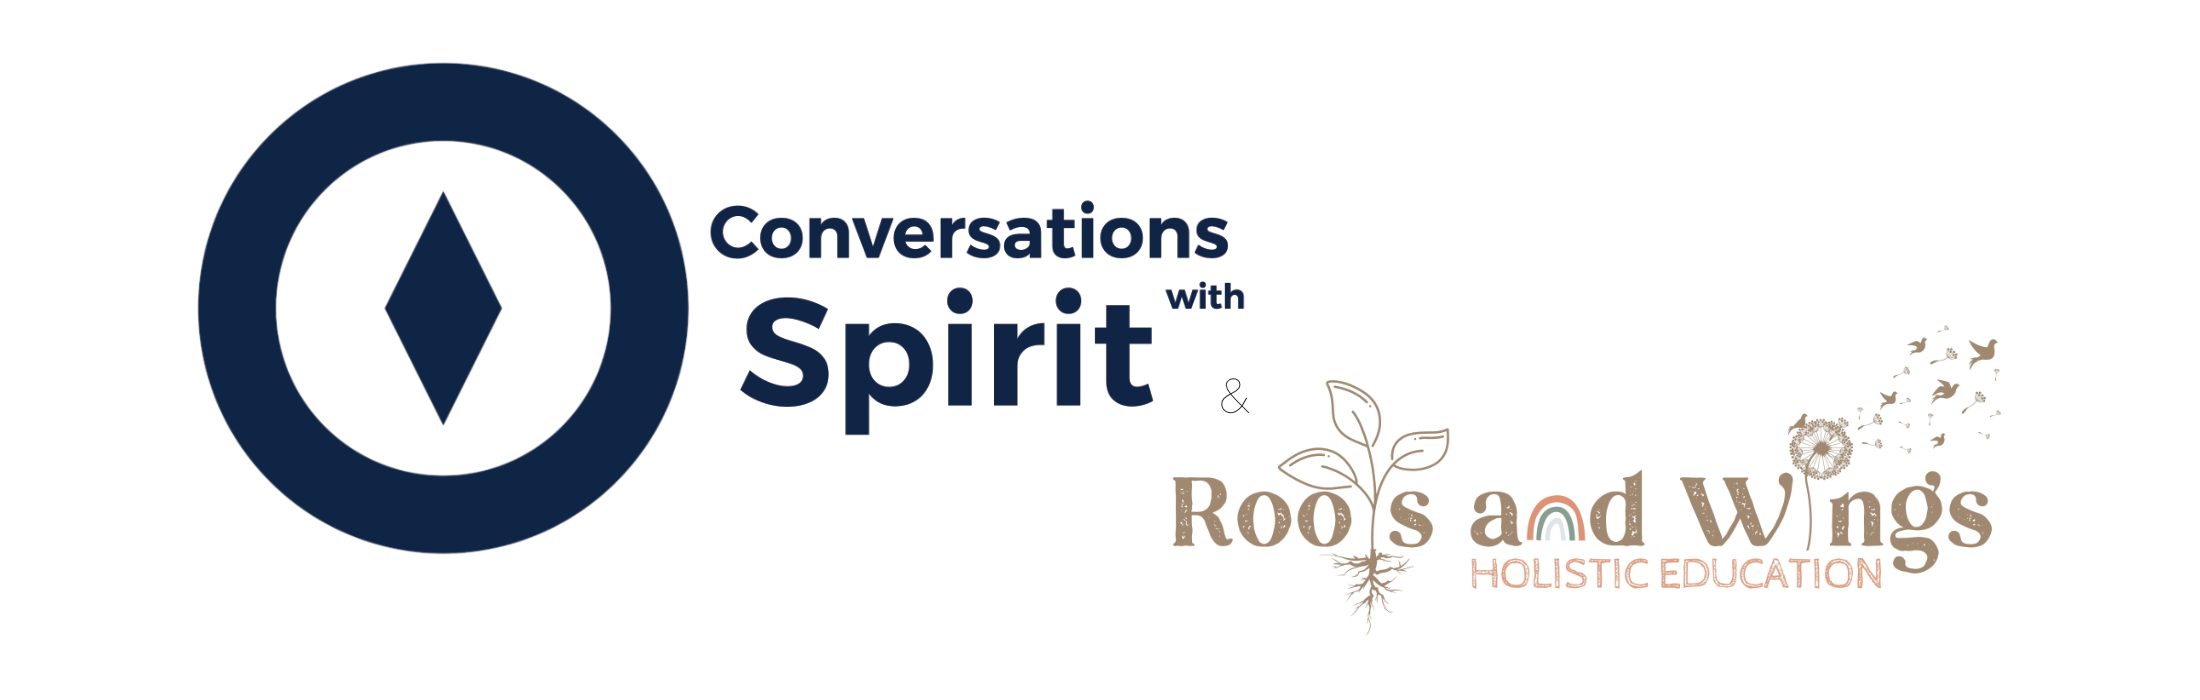 Conversations with Spirit & Roots and Wings